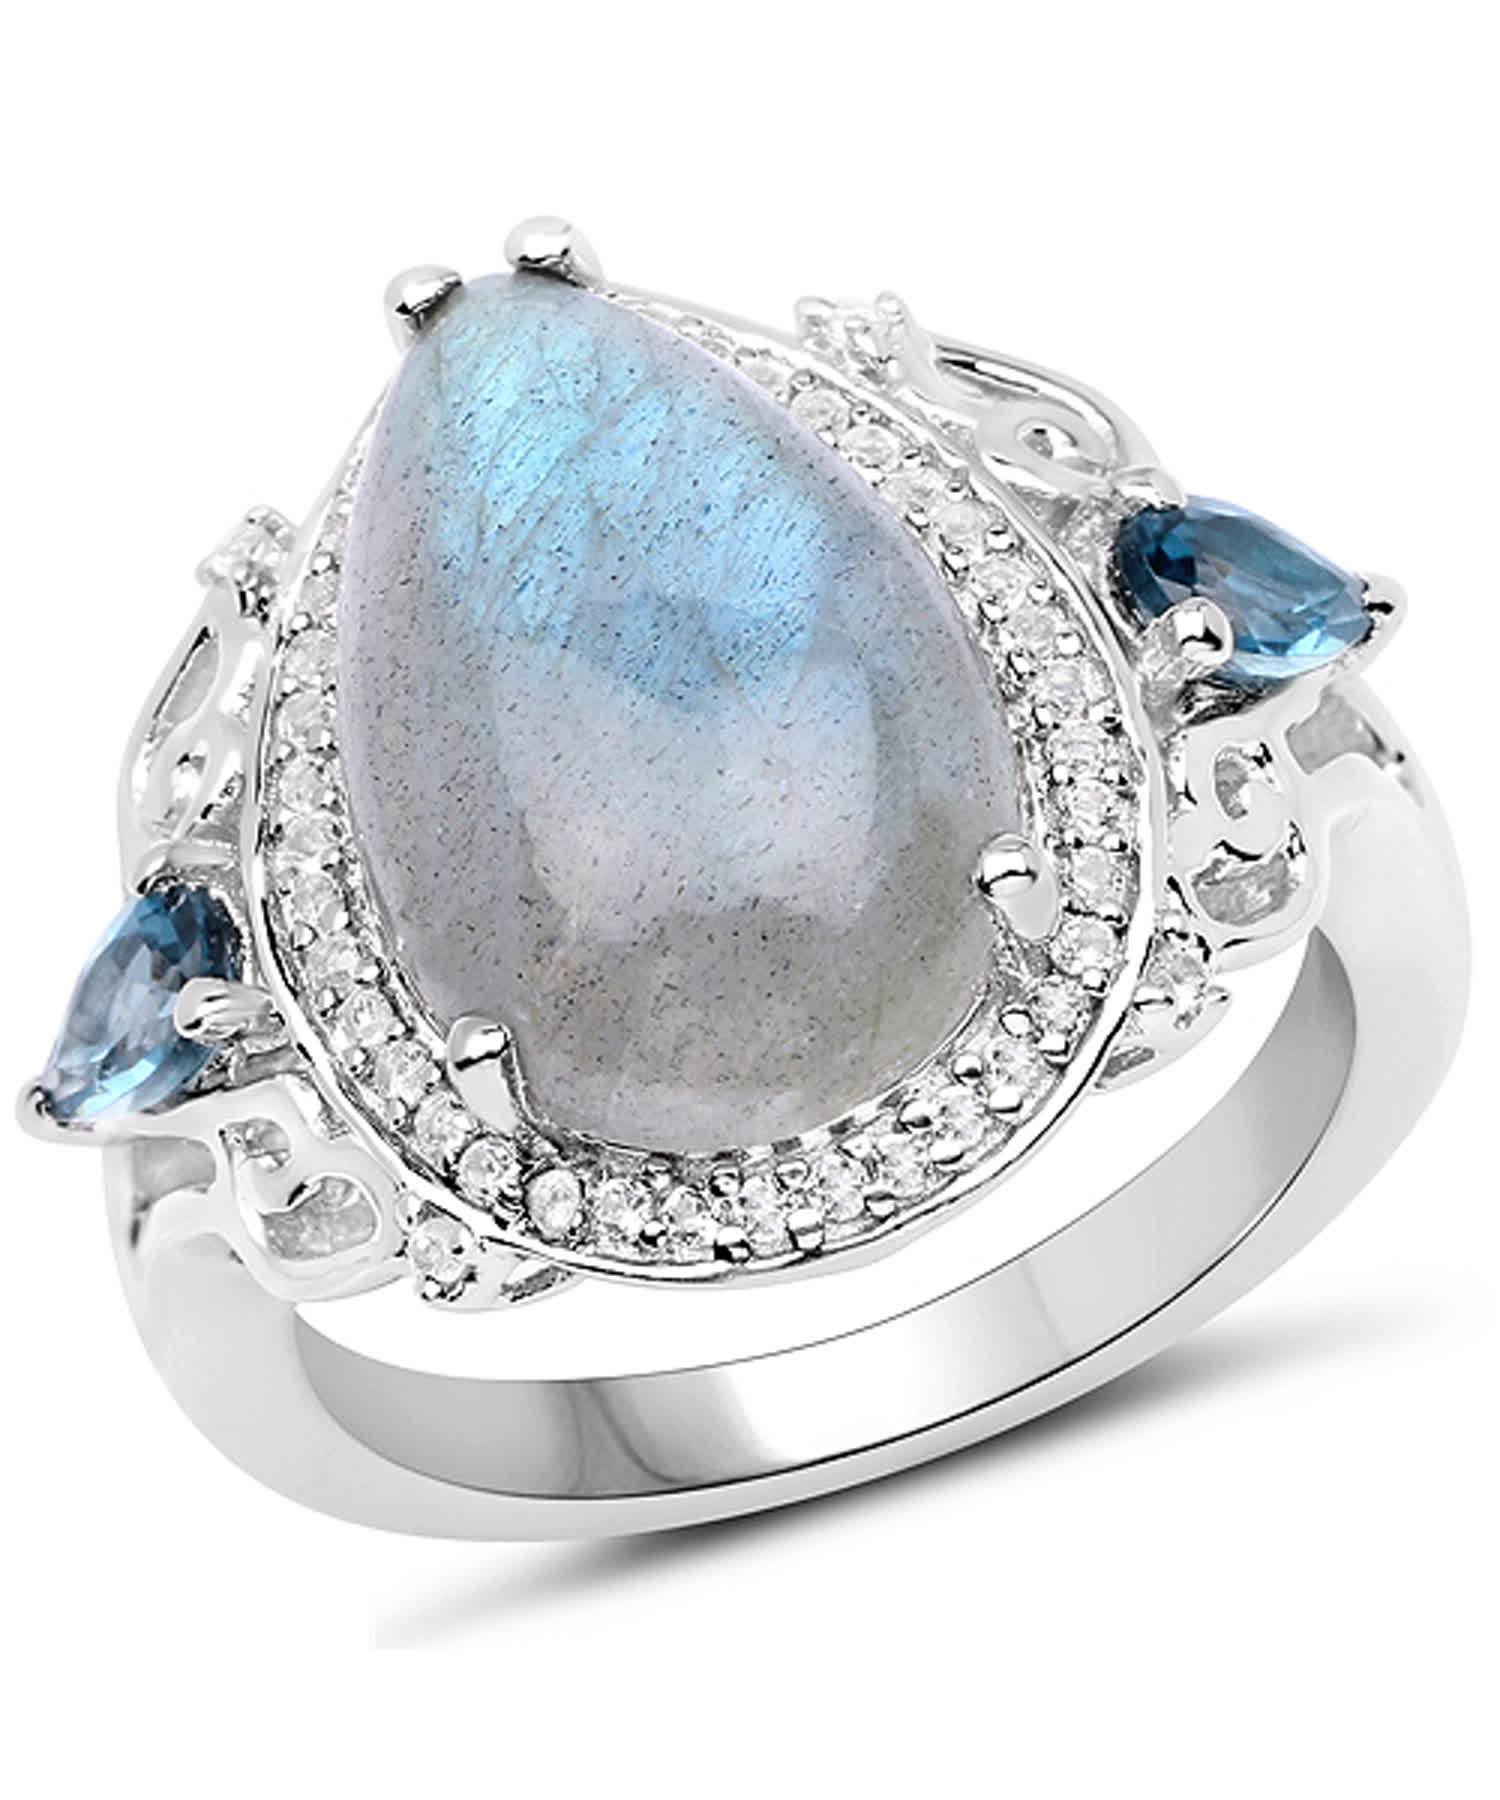 6.18ctw Natural Labradorite and London Blue Topaz Rhodium Plated 925 Sterling Silver Cocktail Ring View 1